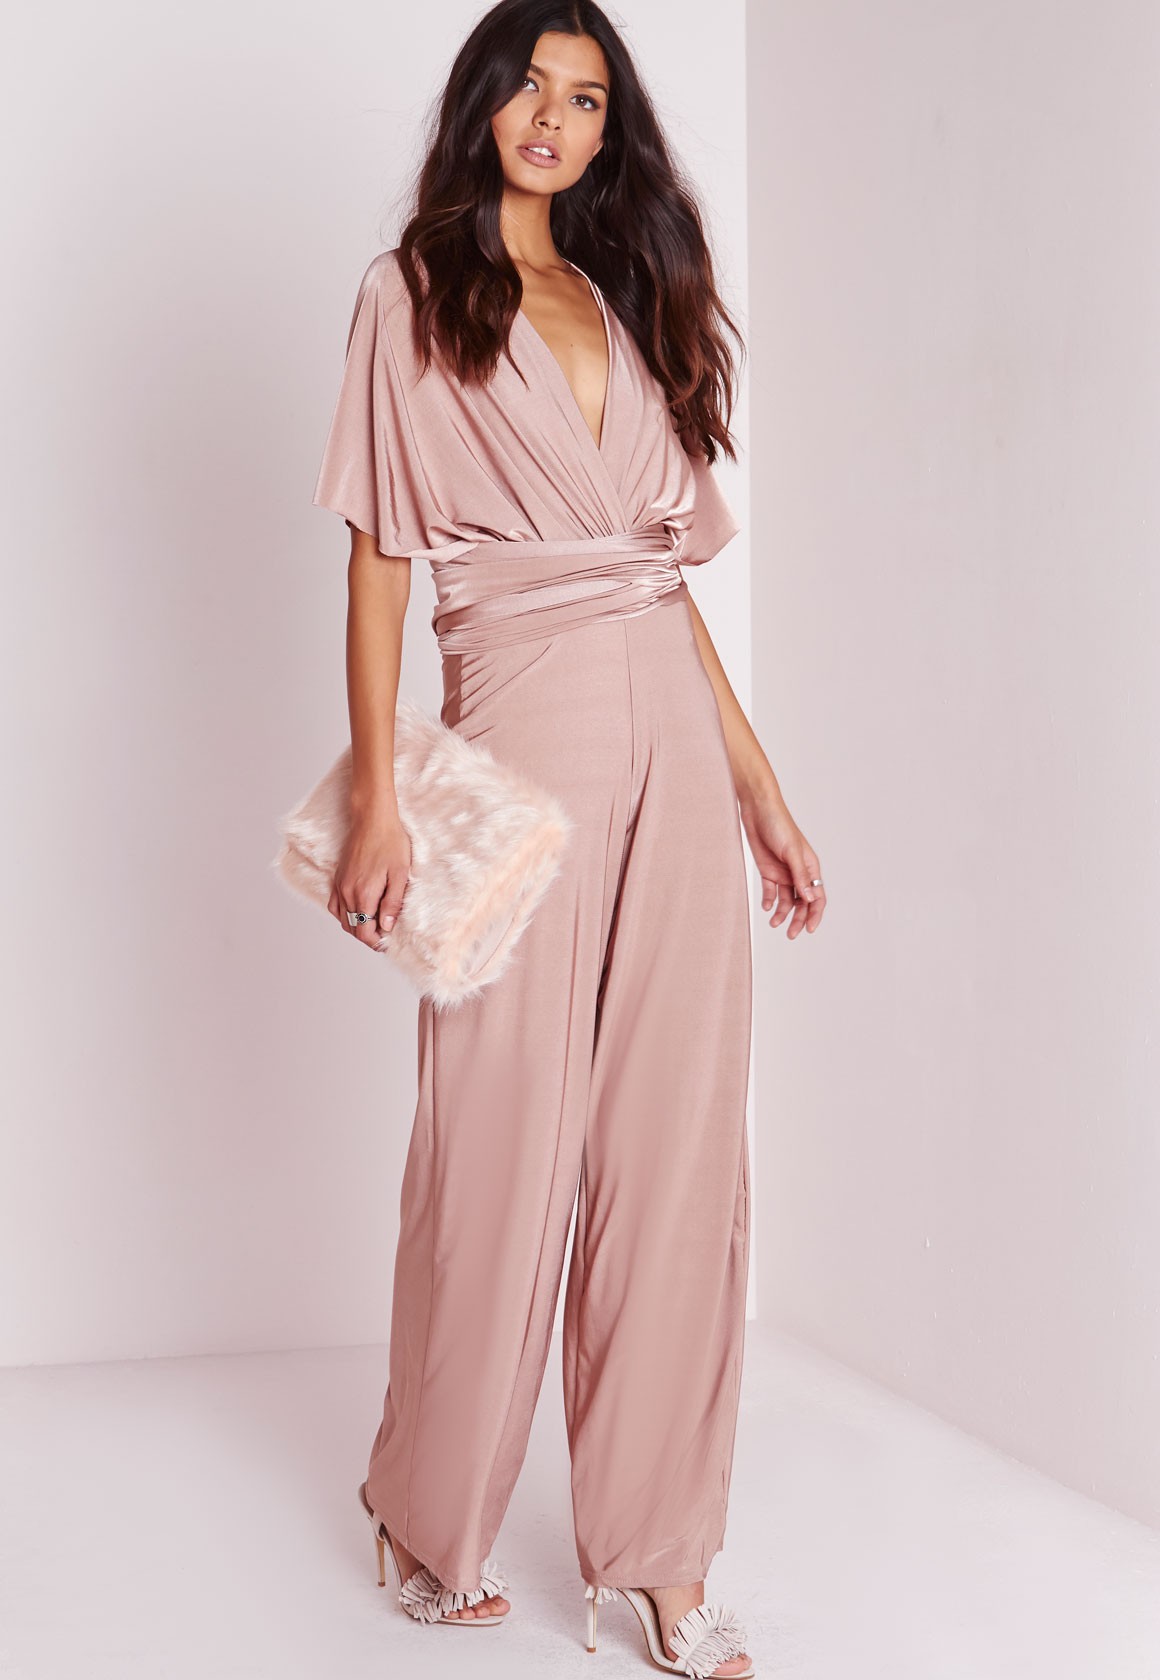 Pink One Shoulder Ladies Jumpsuits For Weddings With Feather Sequins And  Lace Appliques Perfect For Evening Events, Proms, And Special Occasions  From Chicweddings, $126.03 | DHgate.Com